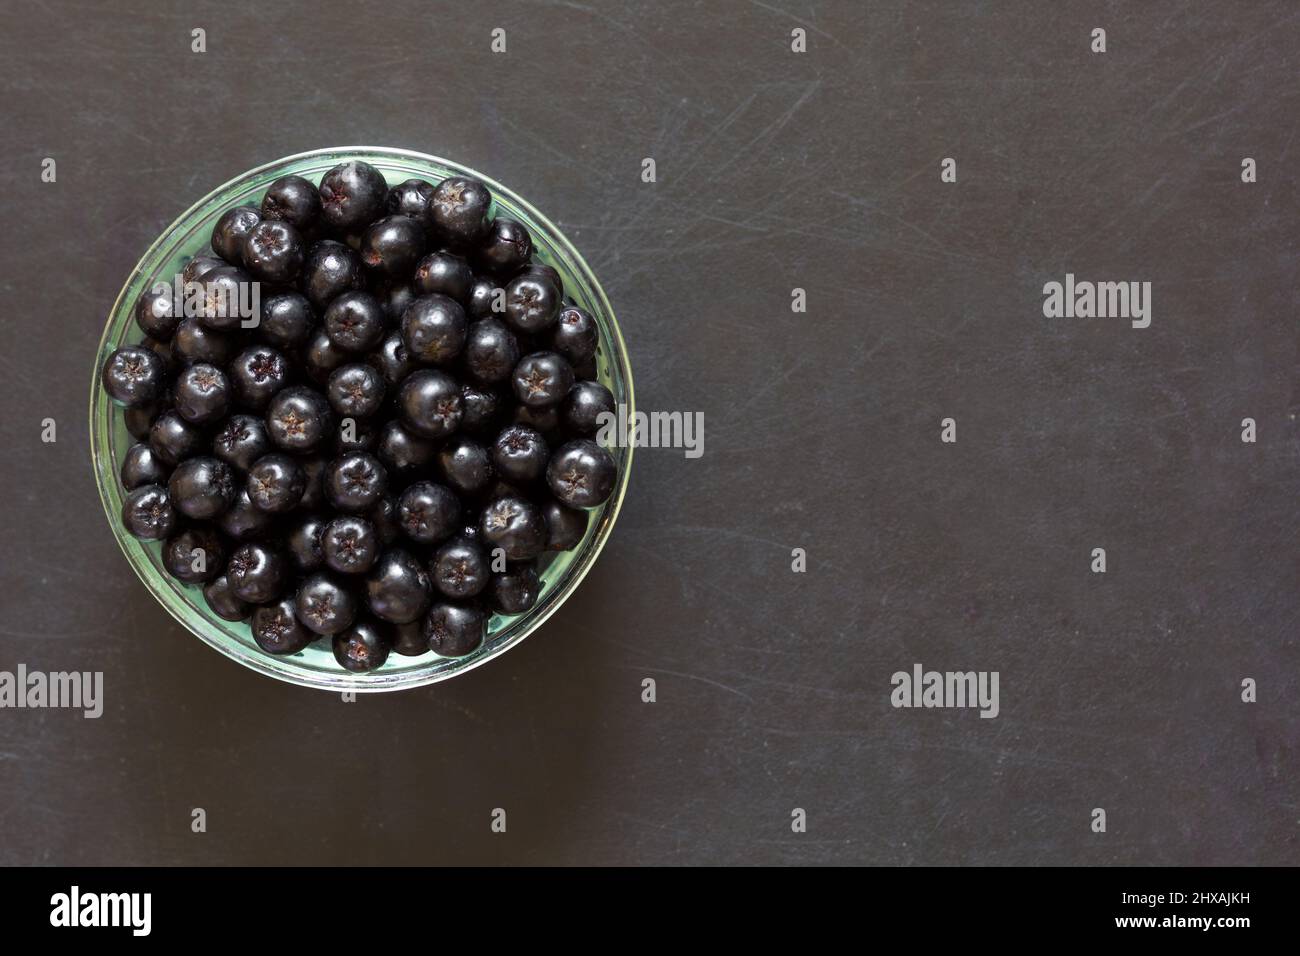 Top view of chokeberries in glass bowl on the black background Stock Photo